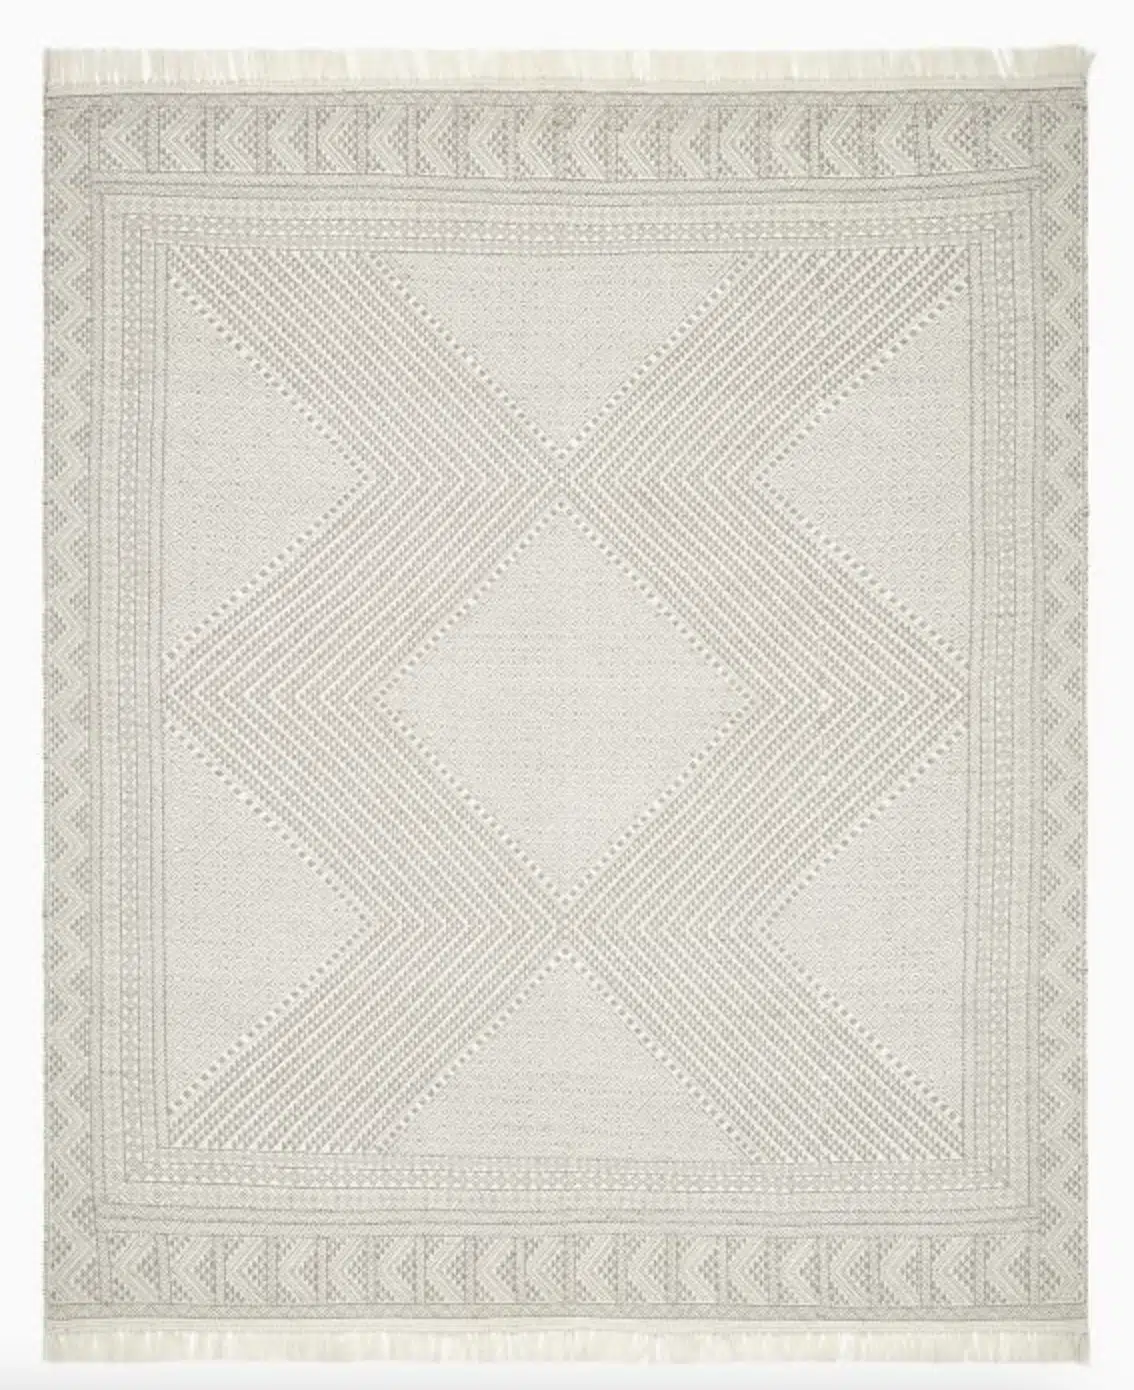 Boho Outdoor Rugs, by lifestyle blogger What The Fab